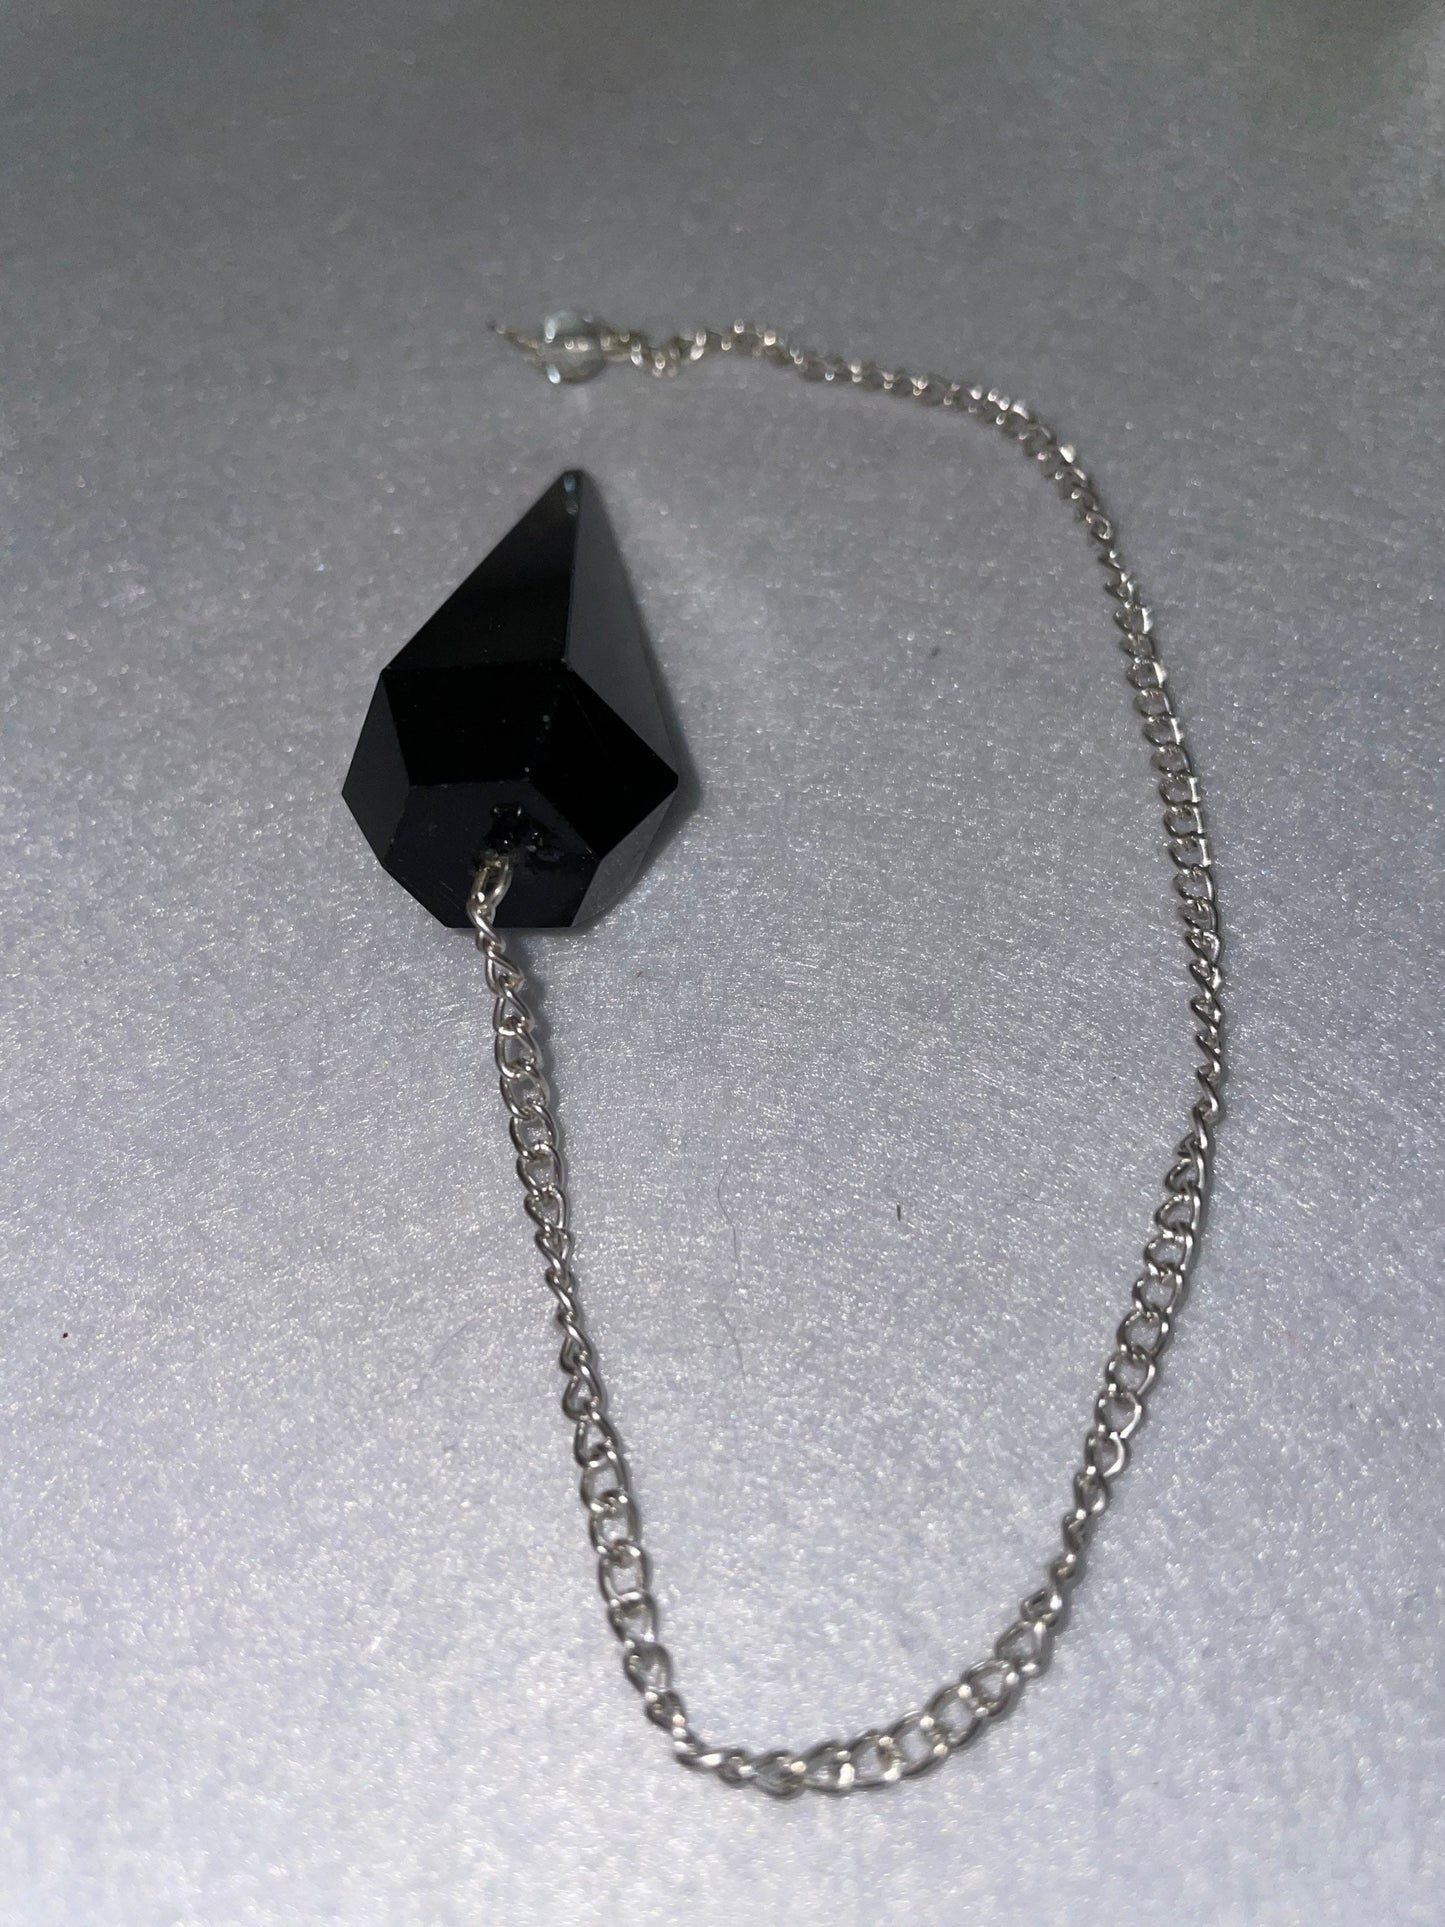 Black Obsidian Pendulum is  1.65” and with chain is 9”